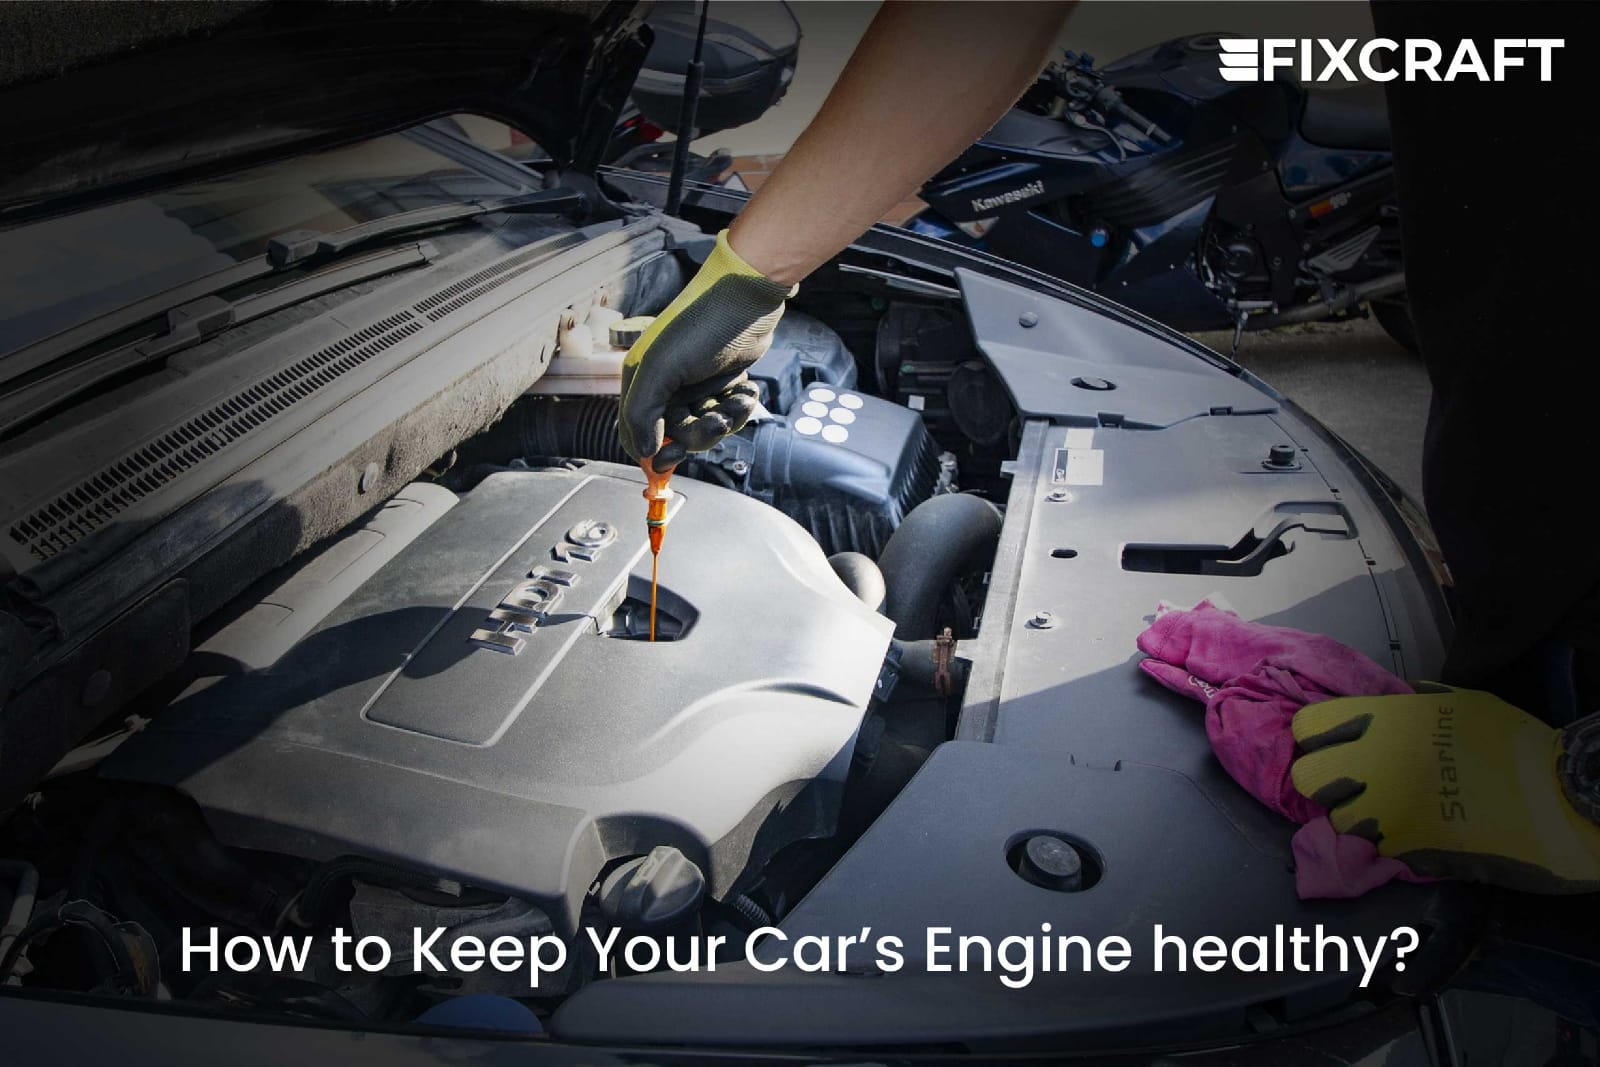 How to keep your car's engine healthy